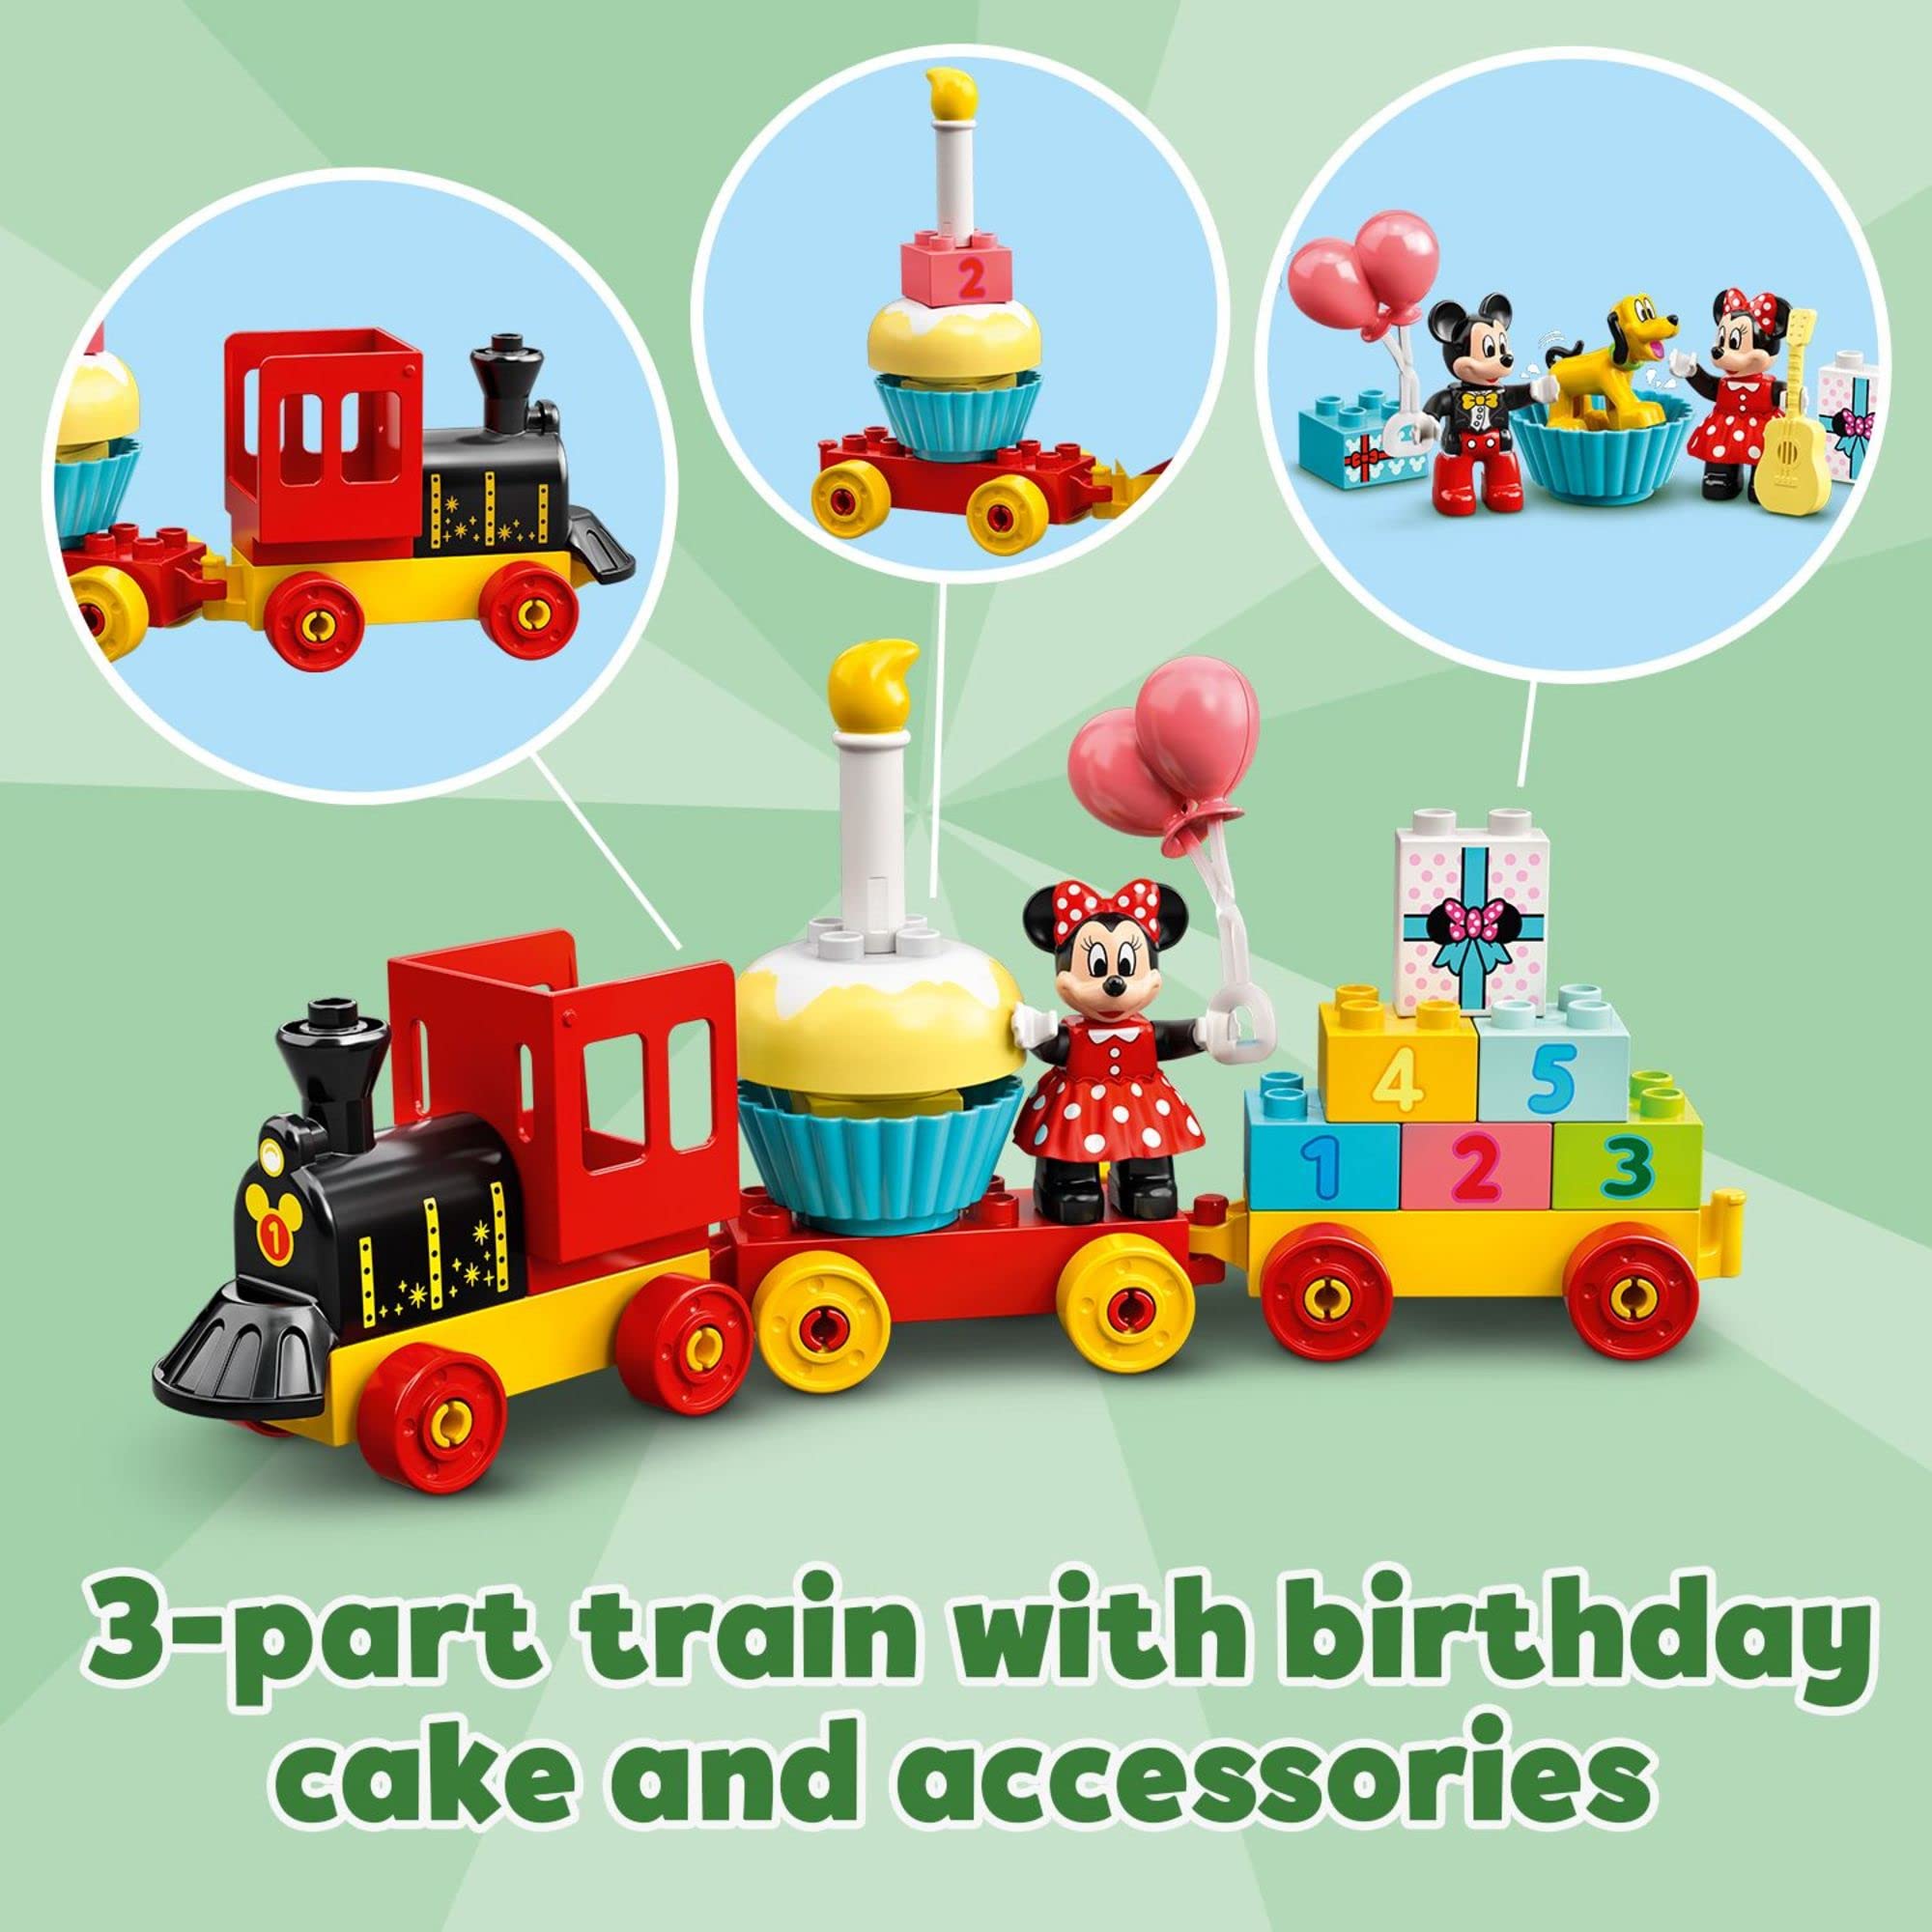 LEGO DUPLO Disney Mickey & Minnie Mouse Birthday Train 10941 - Building Toys for Toddlers with Number Bricks, Cake and Balloons, Early Learning and Motor Skill Toy, Great Gift for Girls, Boys Ages 2+